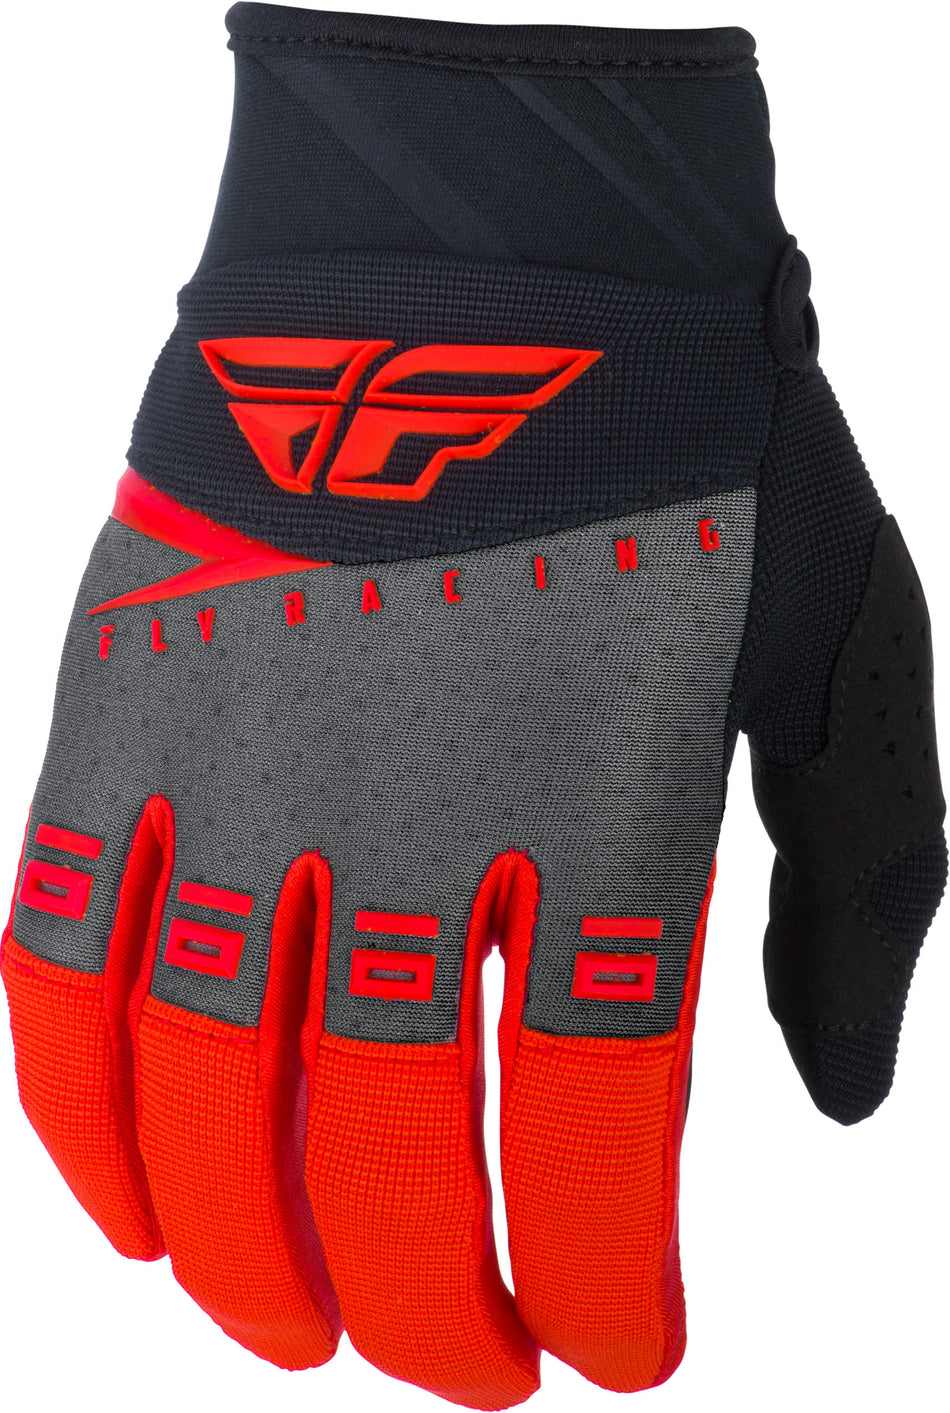 FLY RACING F-16 Gloves Red/Black Grey Sz 03 372-91203